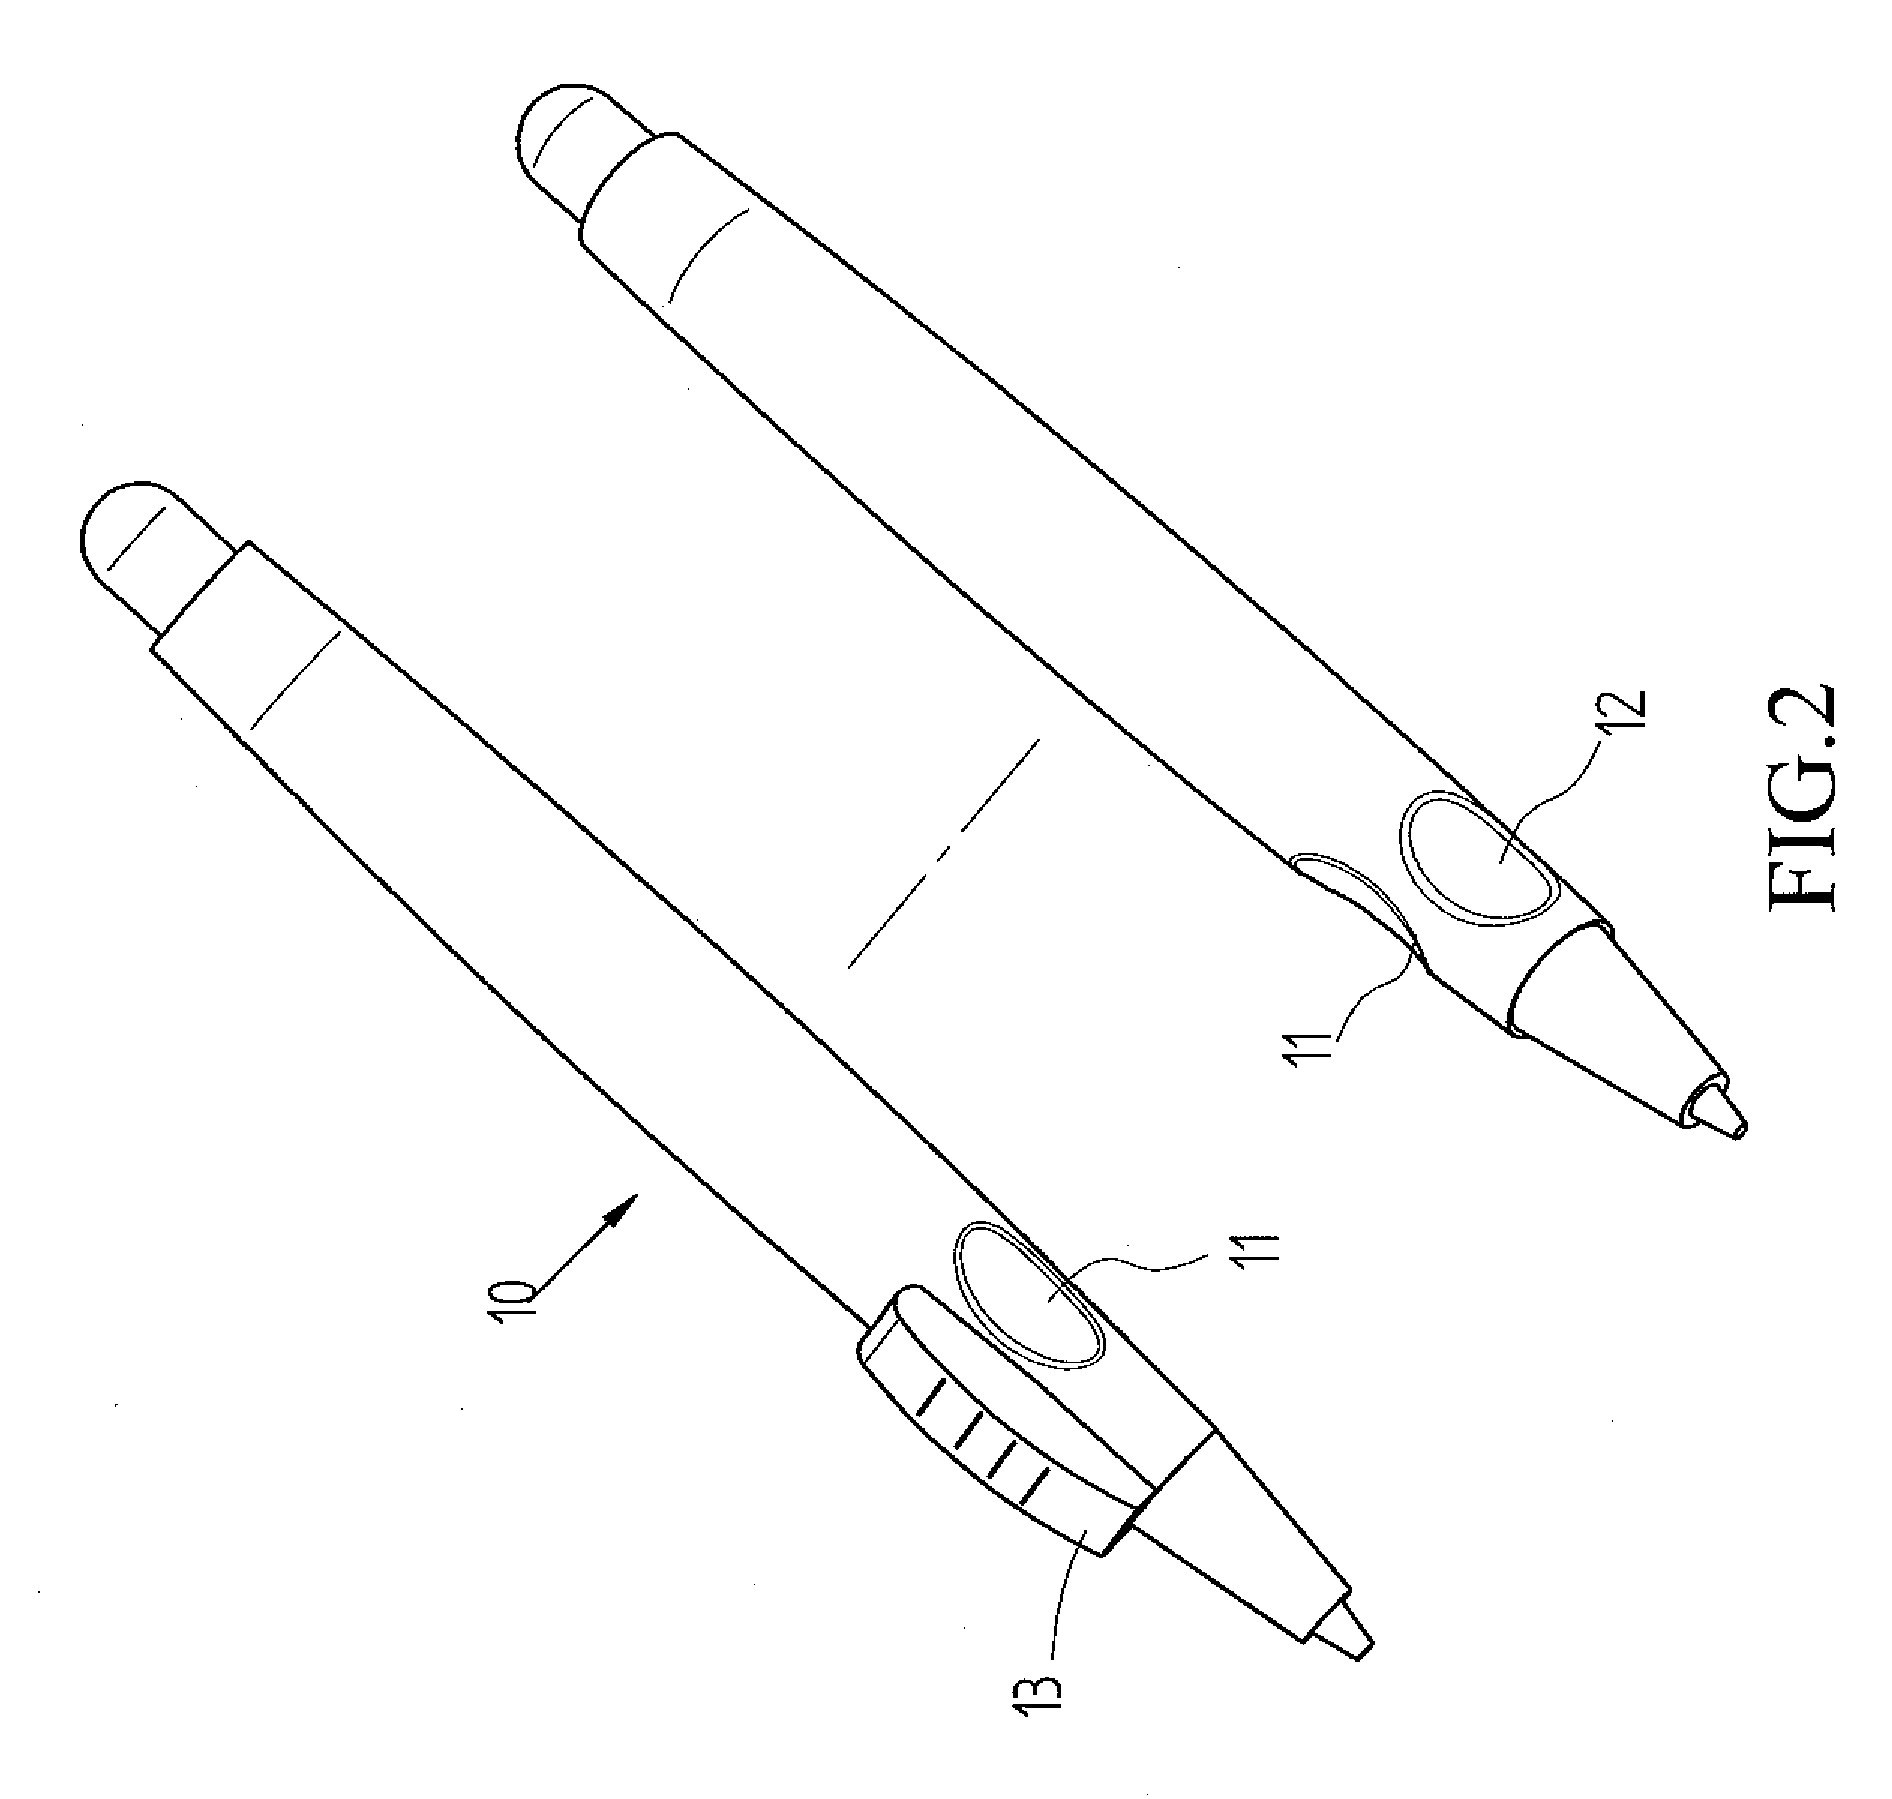 Ergonomic Pen with Convex Device for Index Finger Exerting Force Thereon